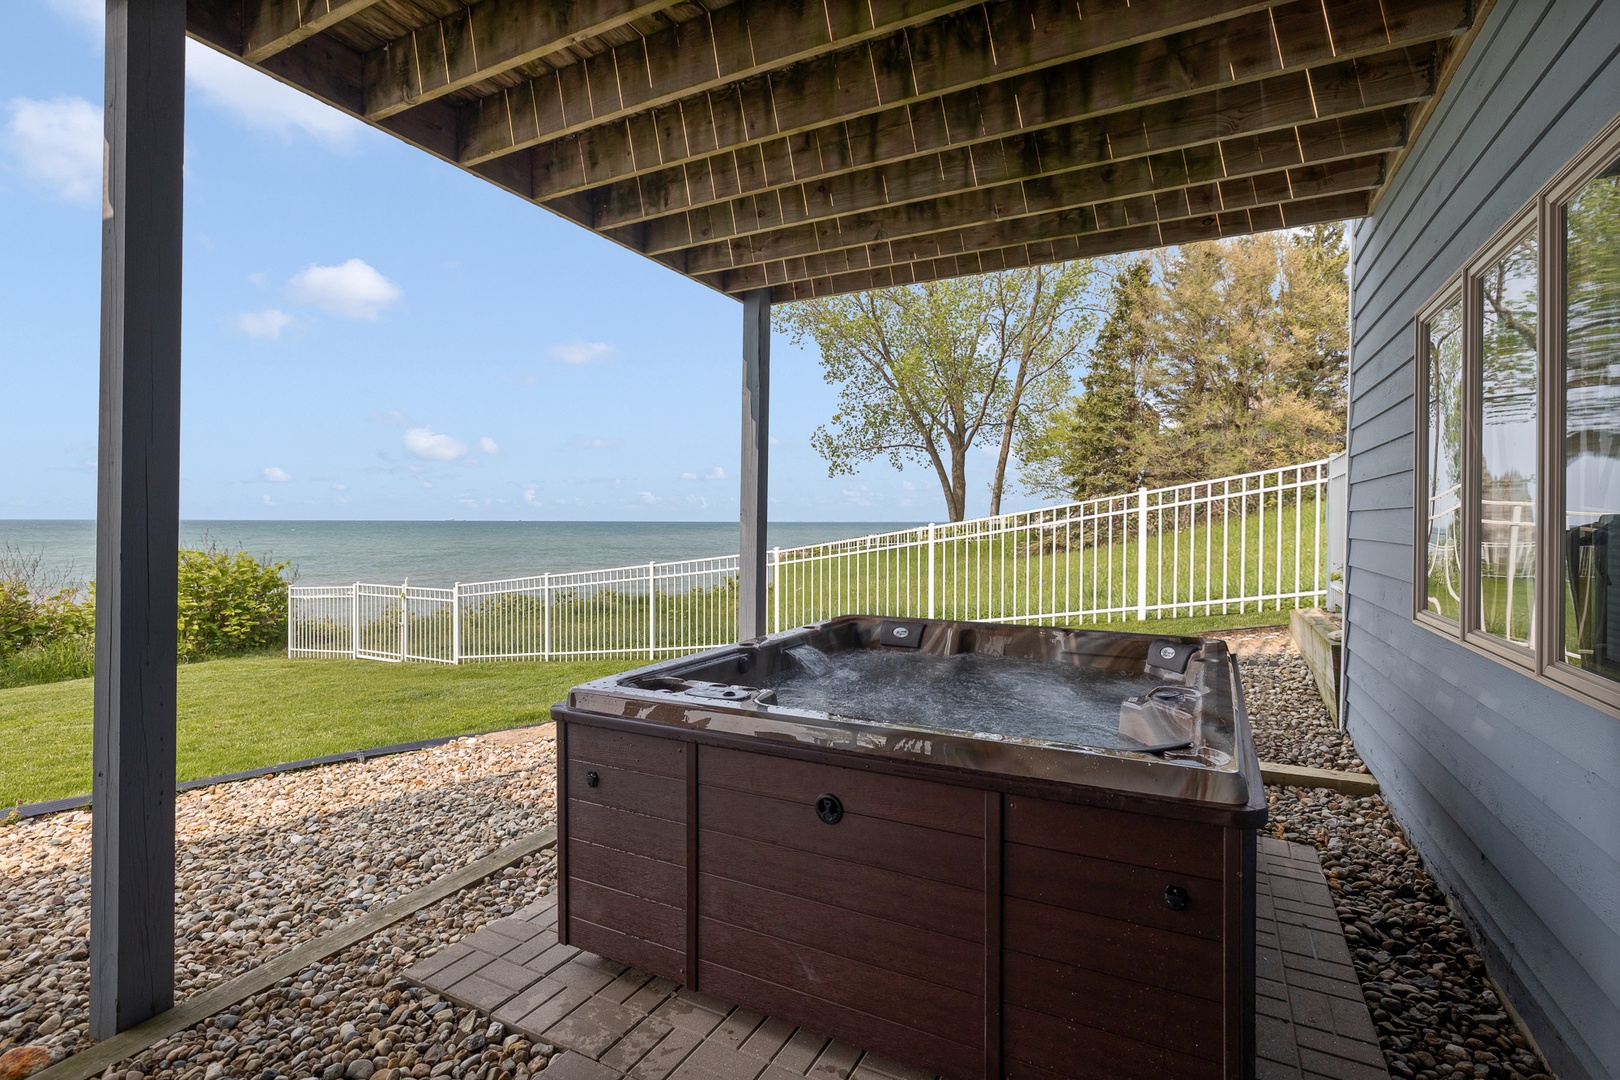 Coastal Escape offers the ultimate vacation with 2 hot tubd and lake views.